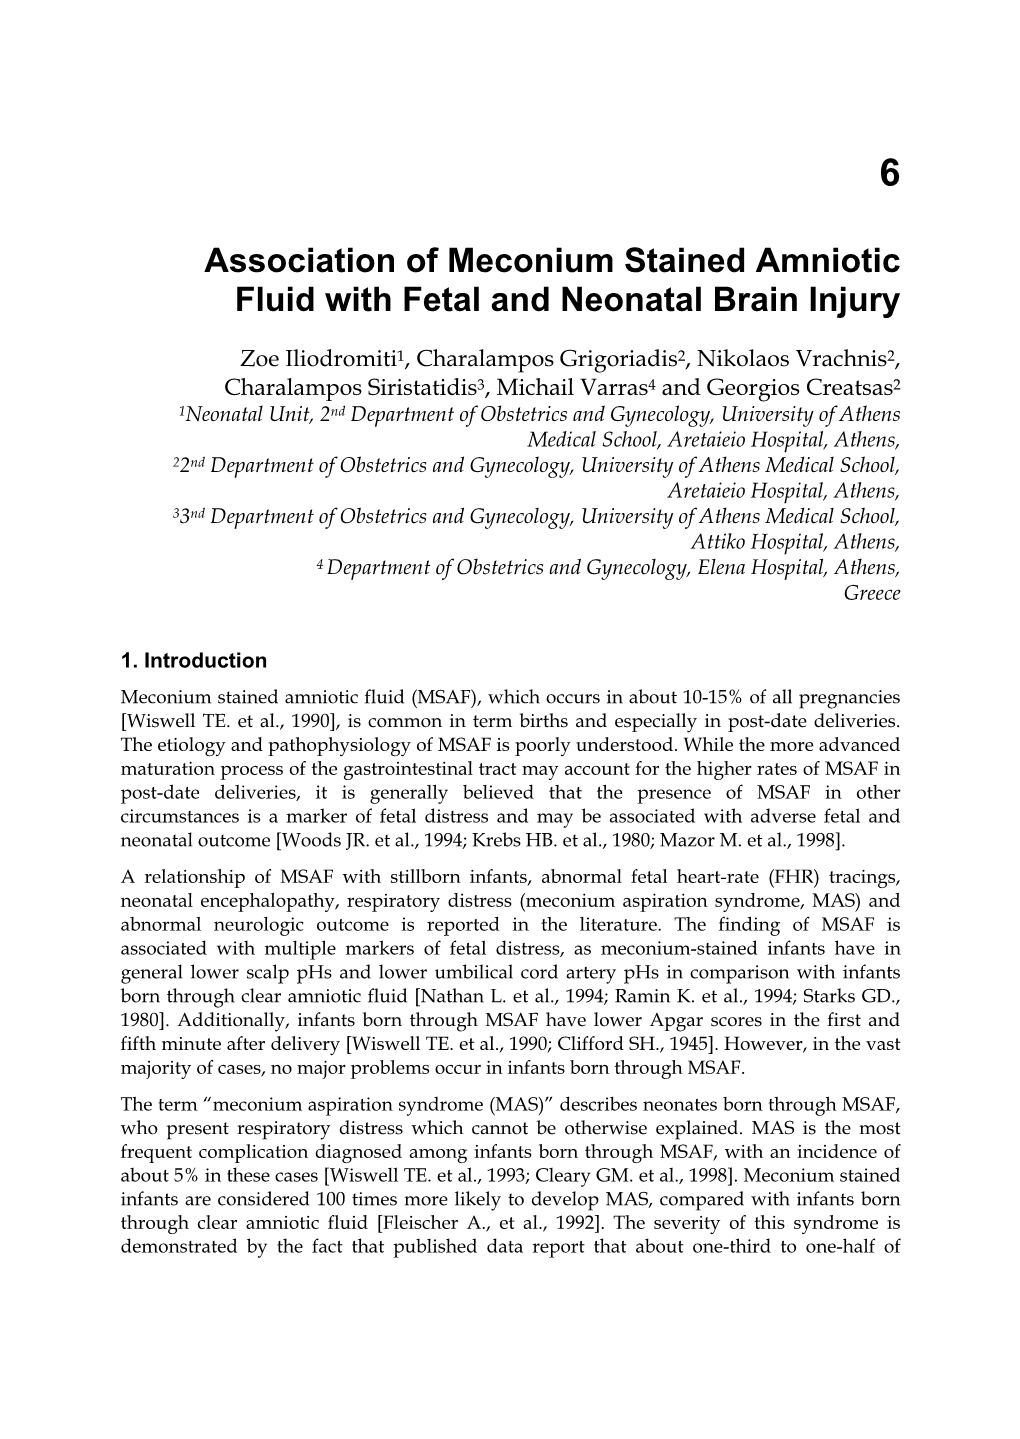 Association of Meconium Stained Amniotic Fluid with Fetal and Neonatal Brain Injury